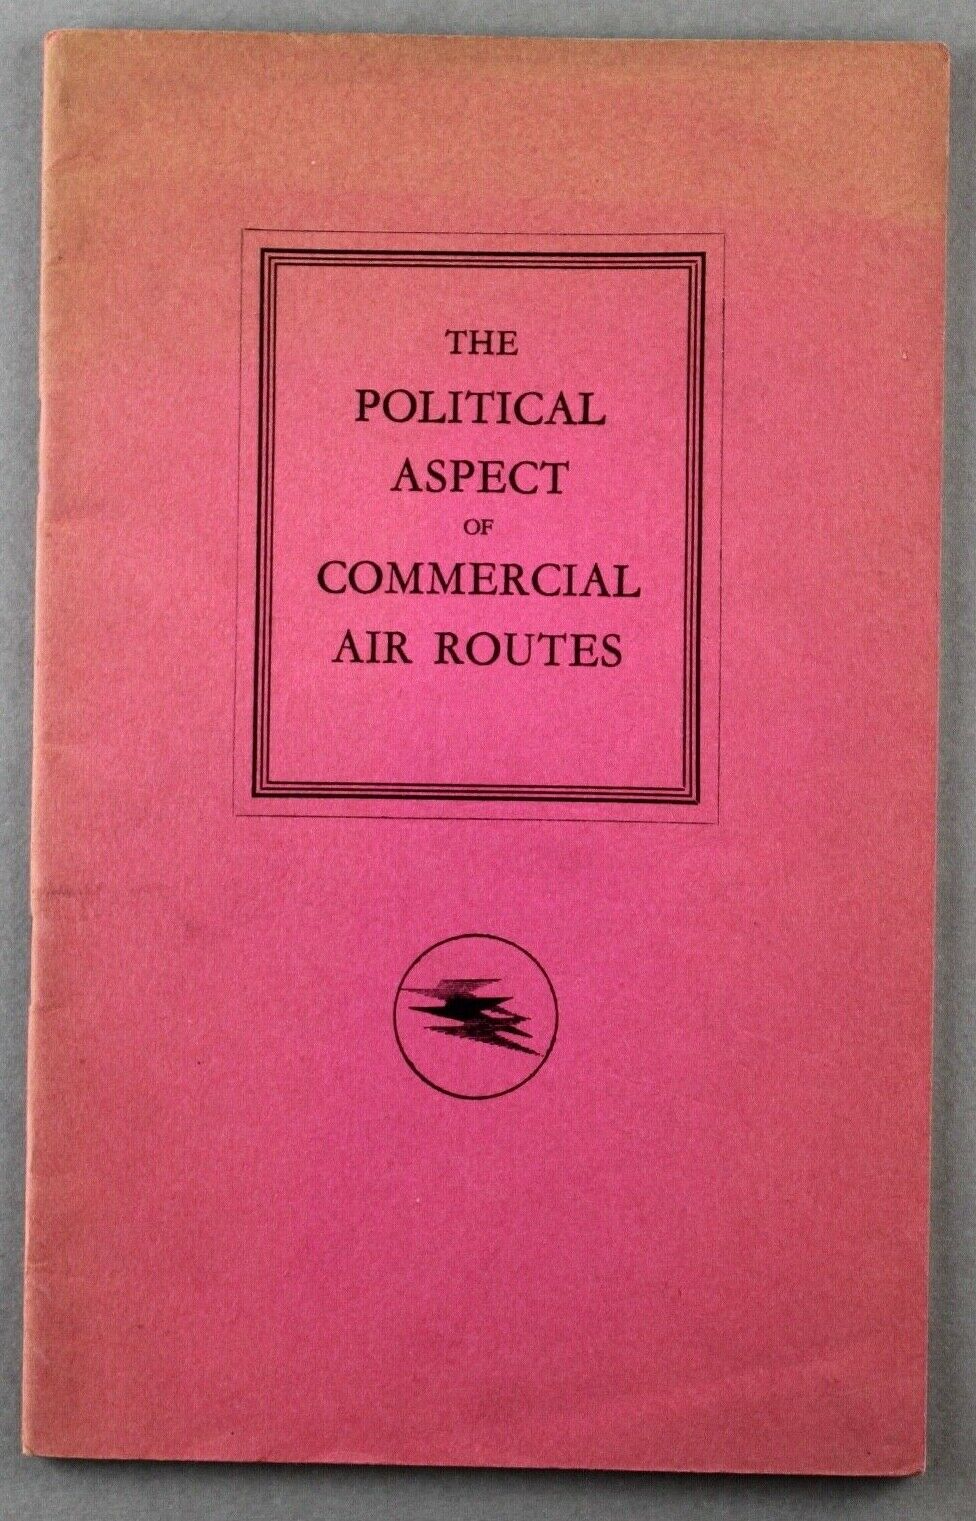 IMPERIAL AIRWAYS BROCHURE - THE POLITICAL ASPECT OF COMMERCIAL AIR ROUTES 1932